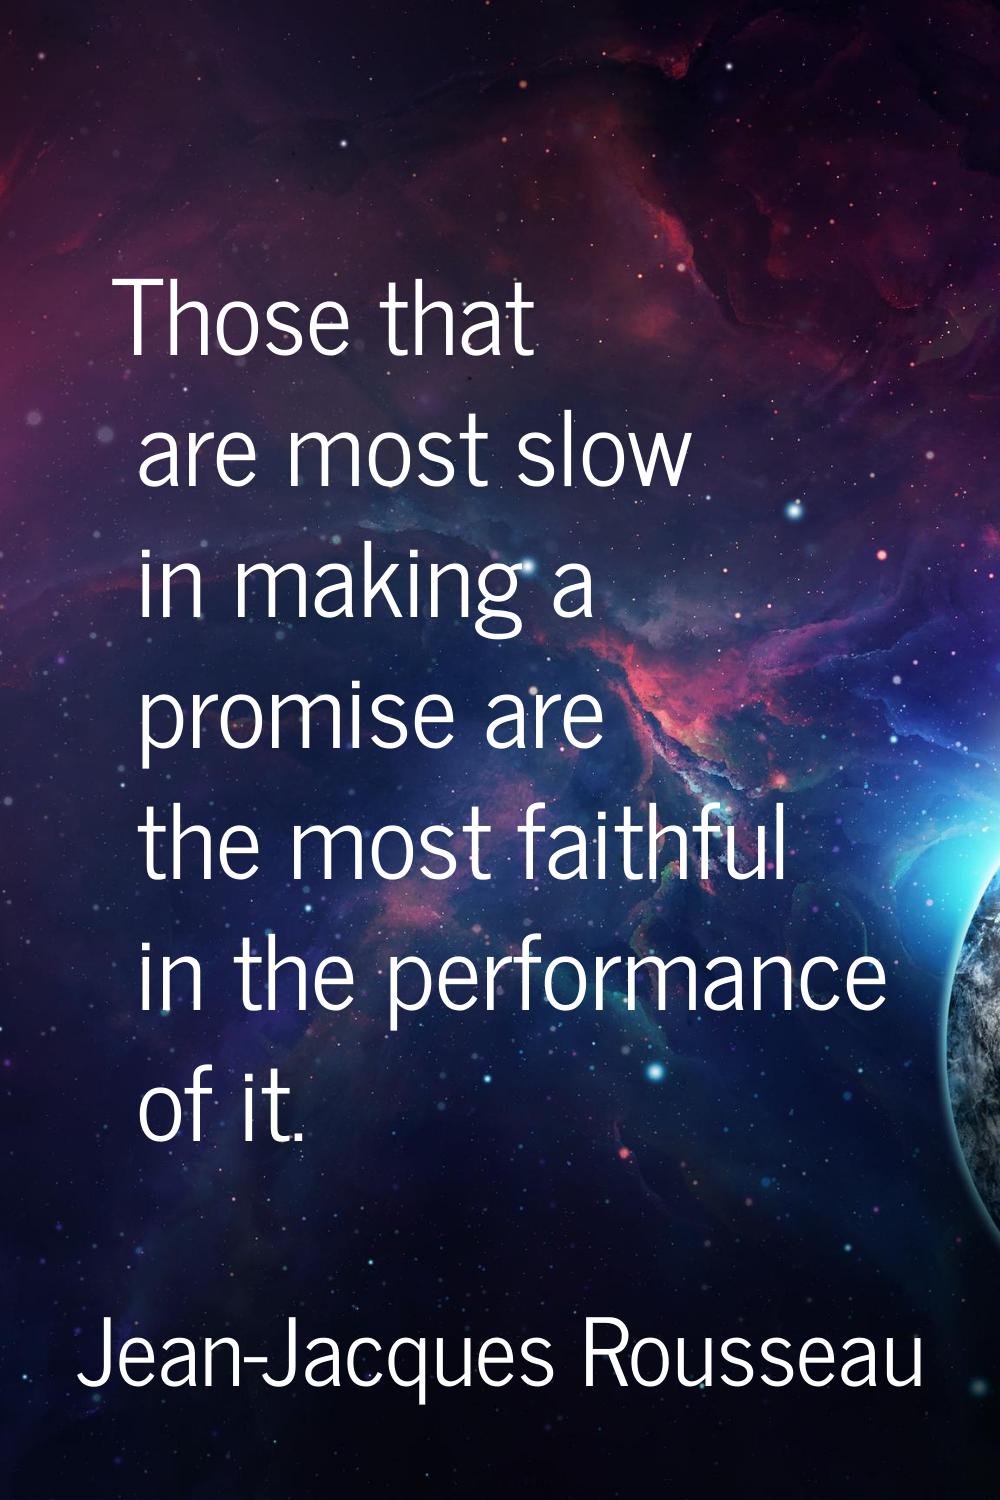 Those that are most slow in making a promise are the most faithful in the performance of it.